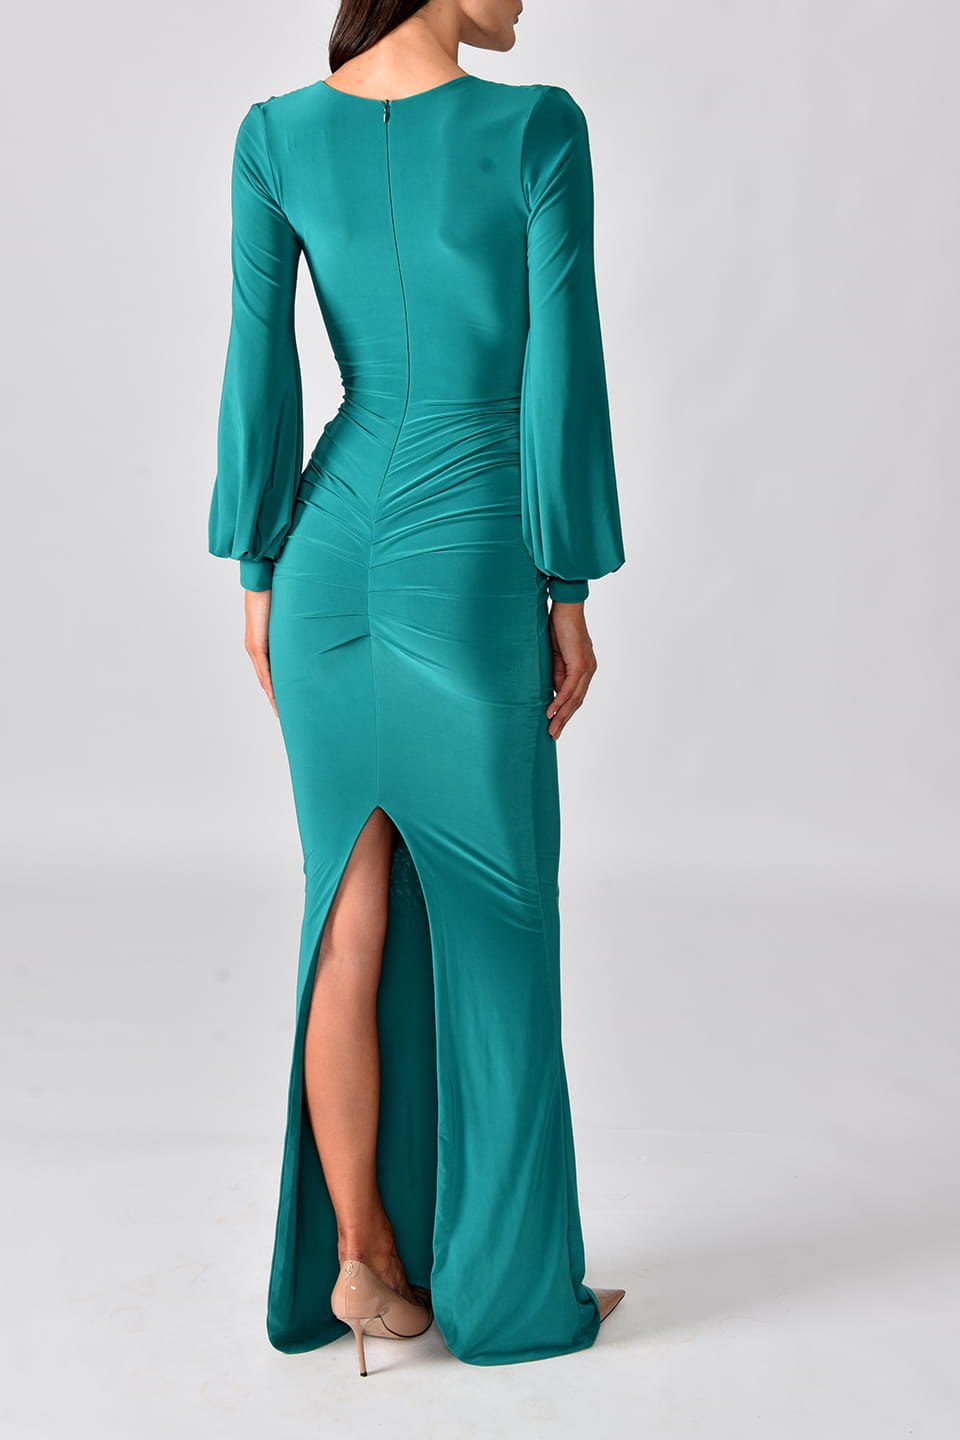 Thumbnail for Product gallery 2, Model wearing emerald green dress with long sleeves from Hamel fashion stylist, posing from behind